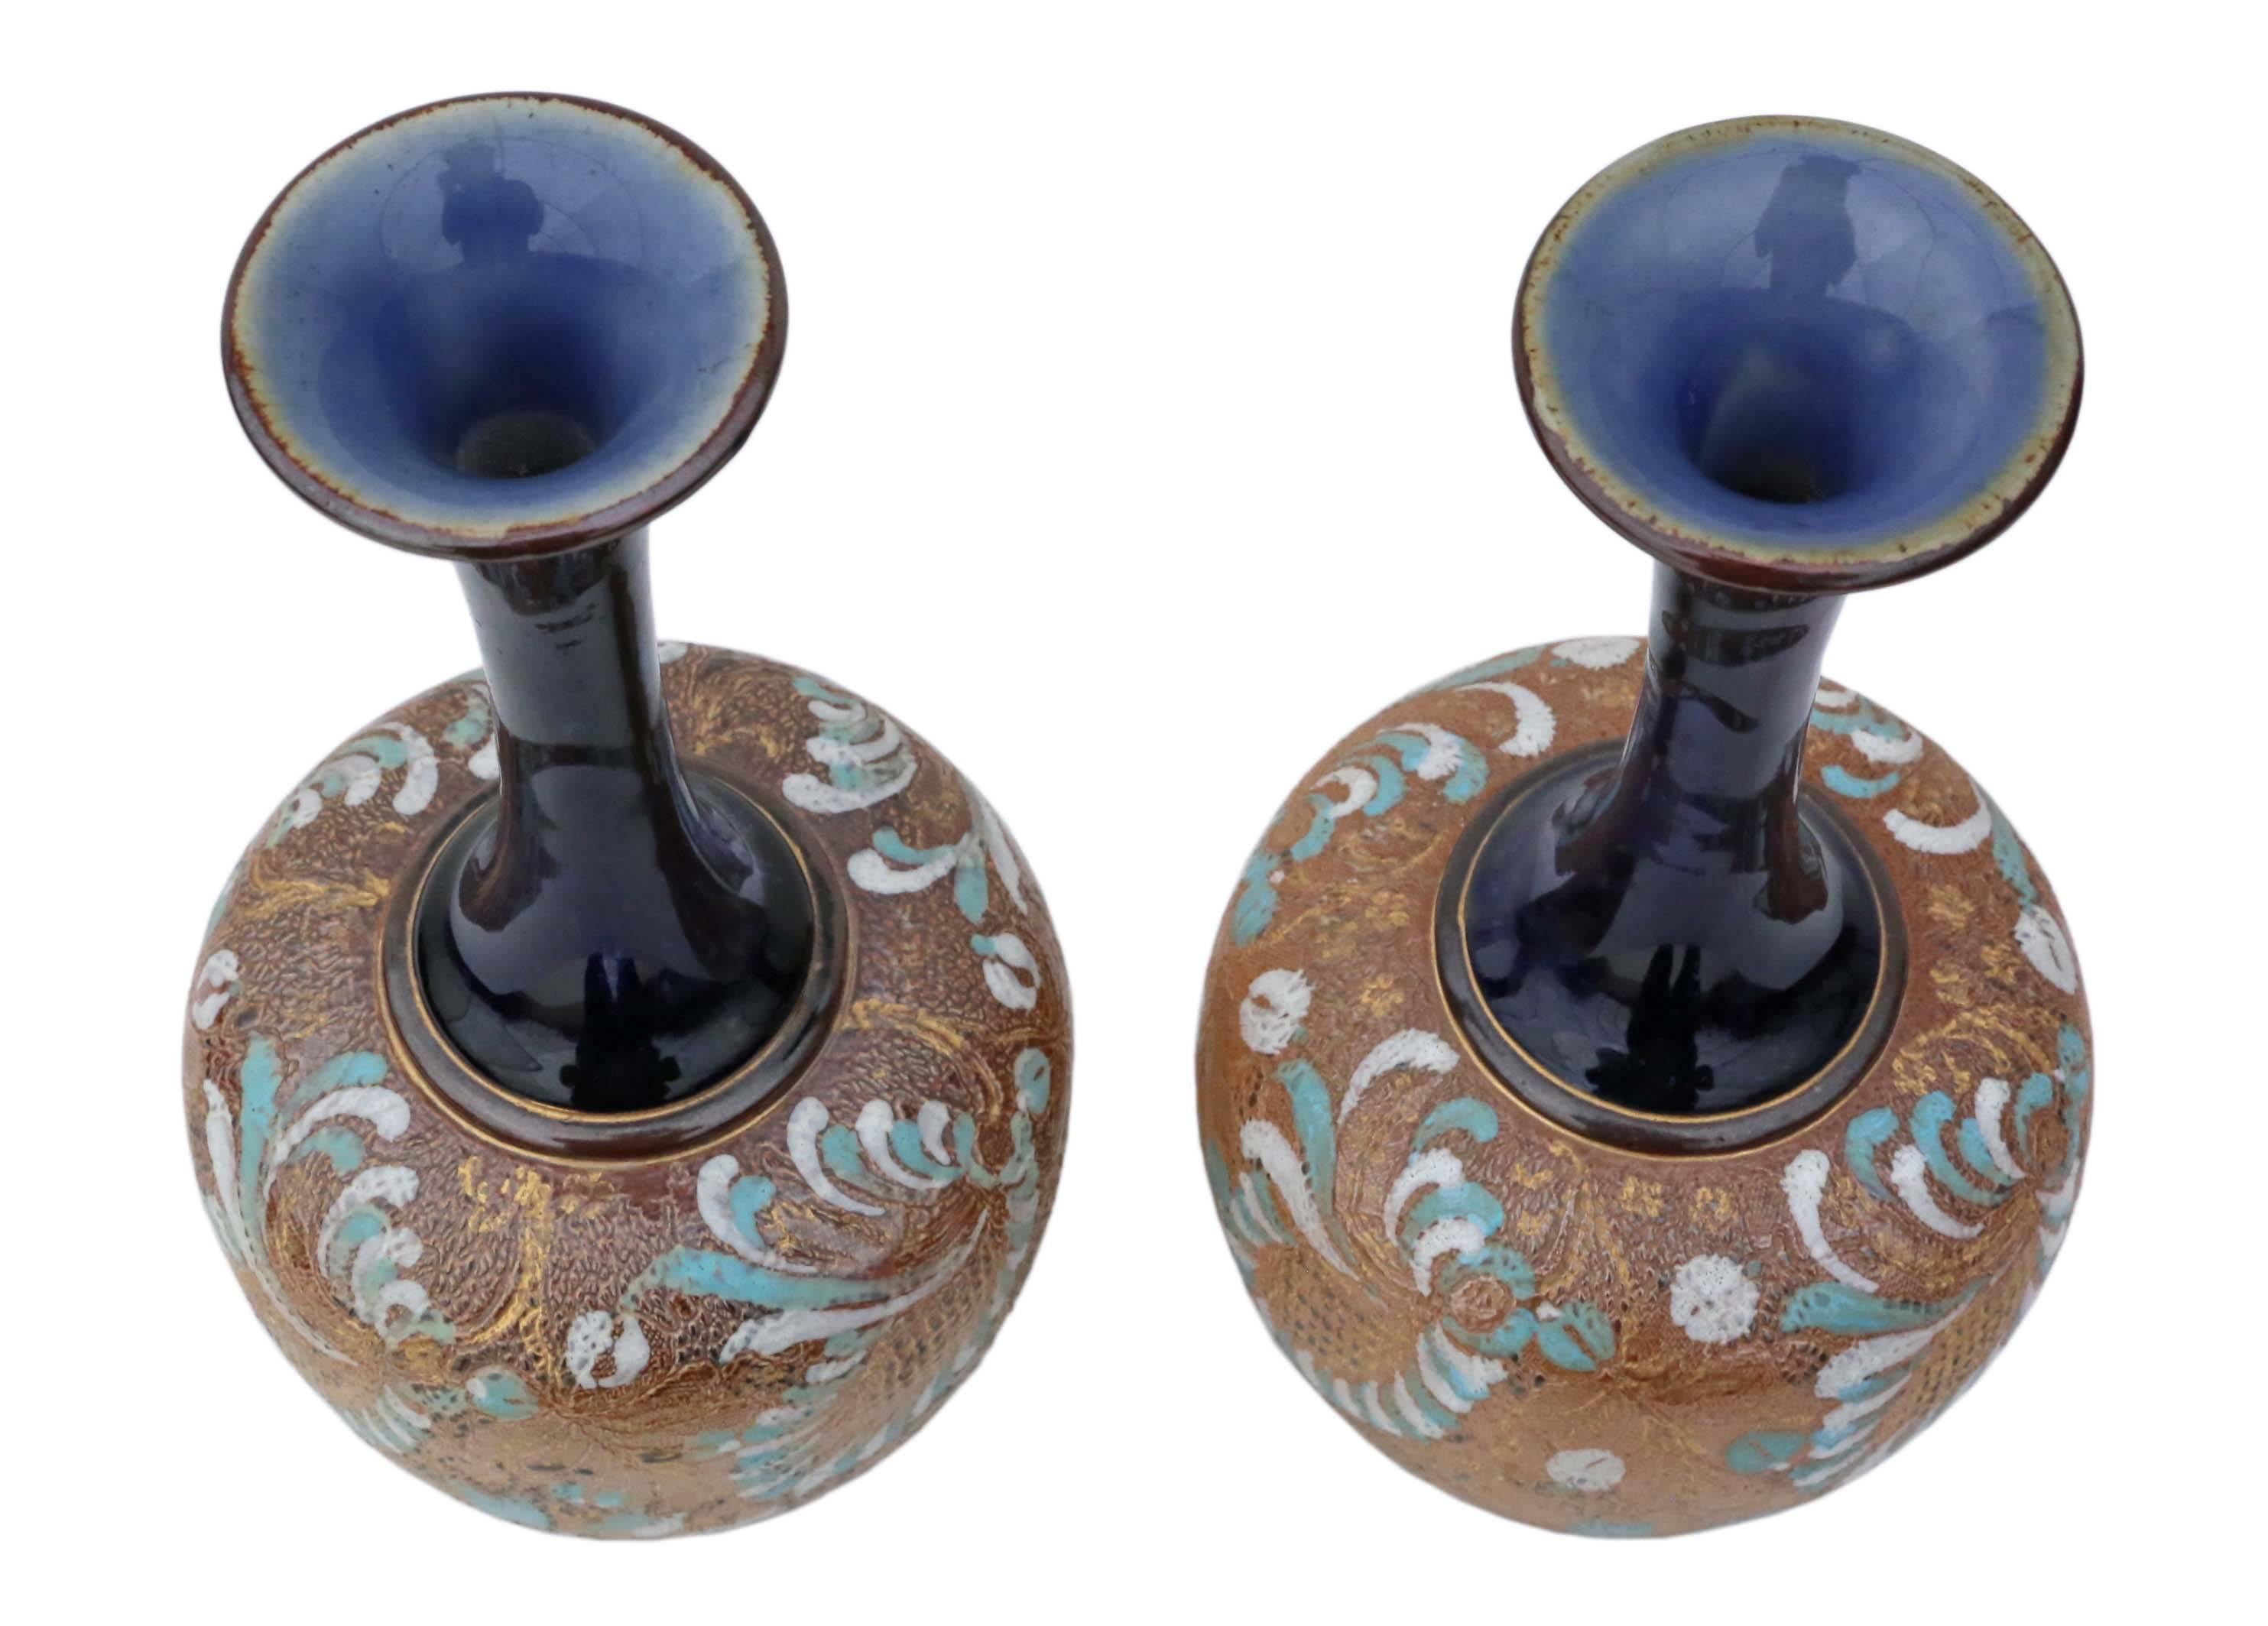 Antique Pair of Royal Doulton Slater Vases In Good Condition For Sale In Wisbech, Walton Wisbech